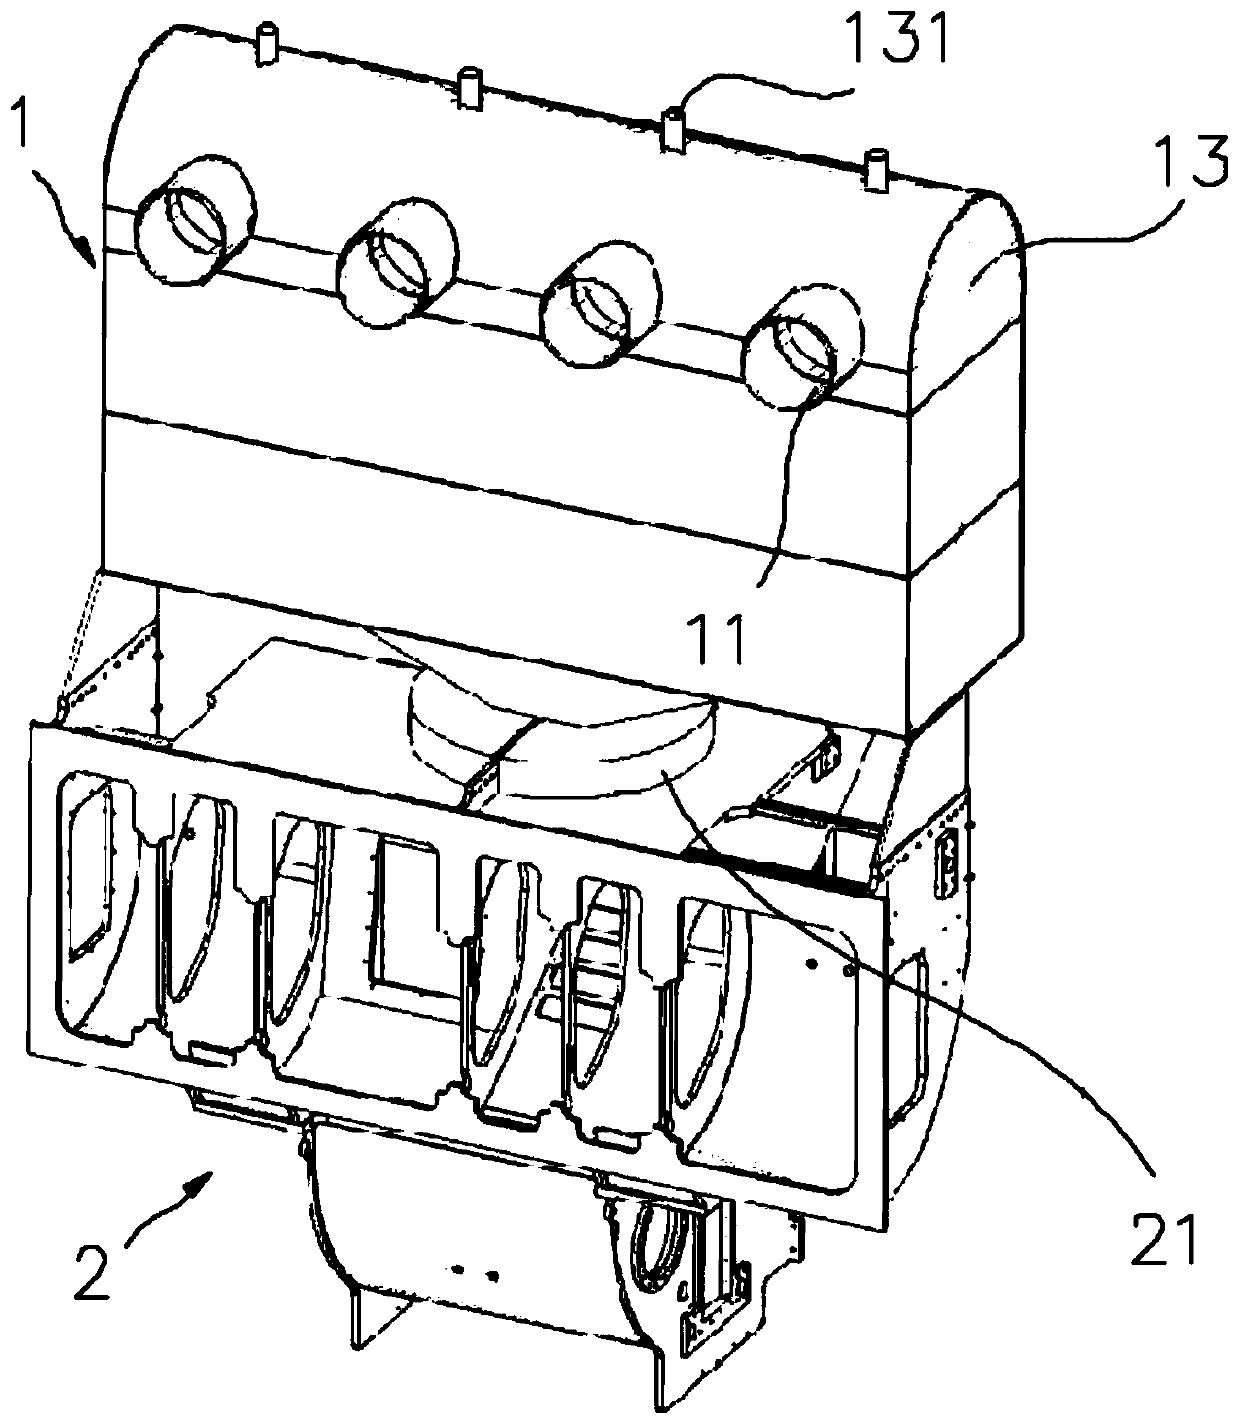 Exhaust and scavenging system of two-stroke diesel engine